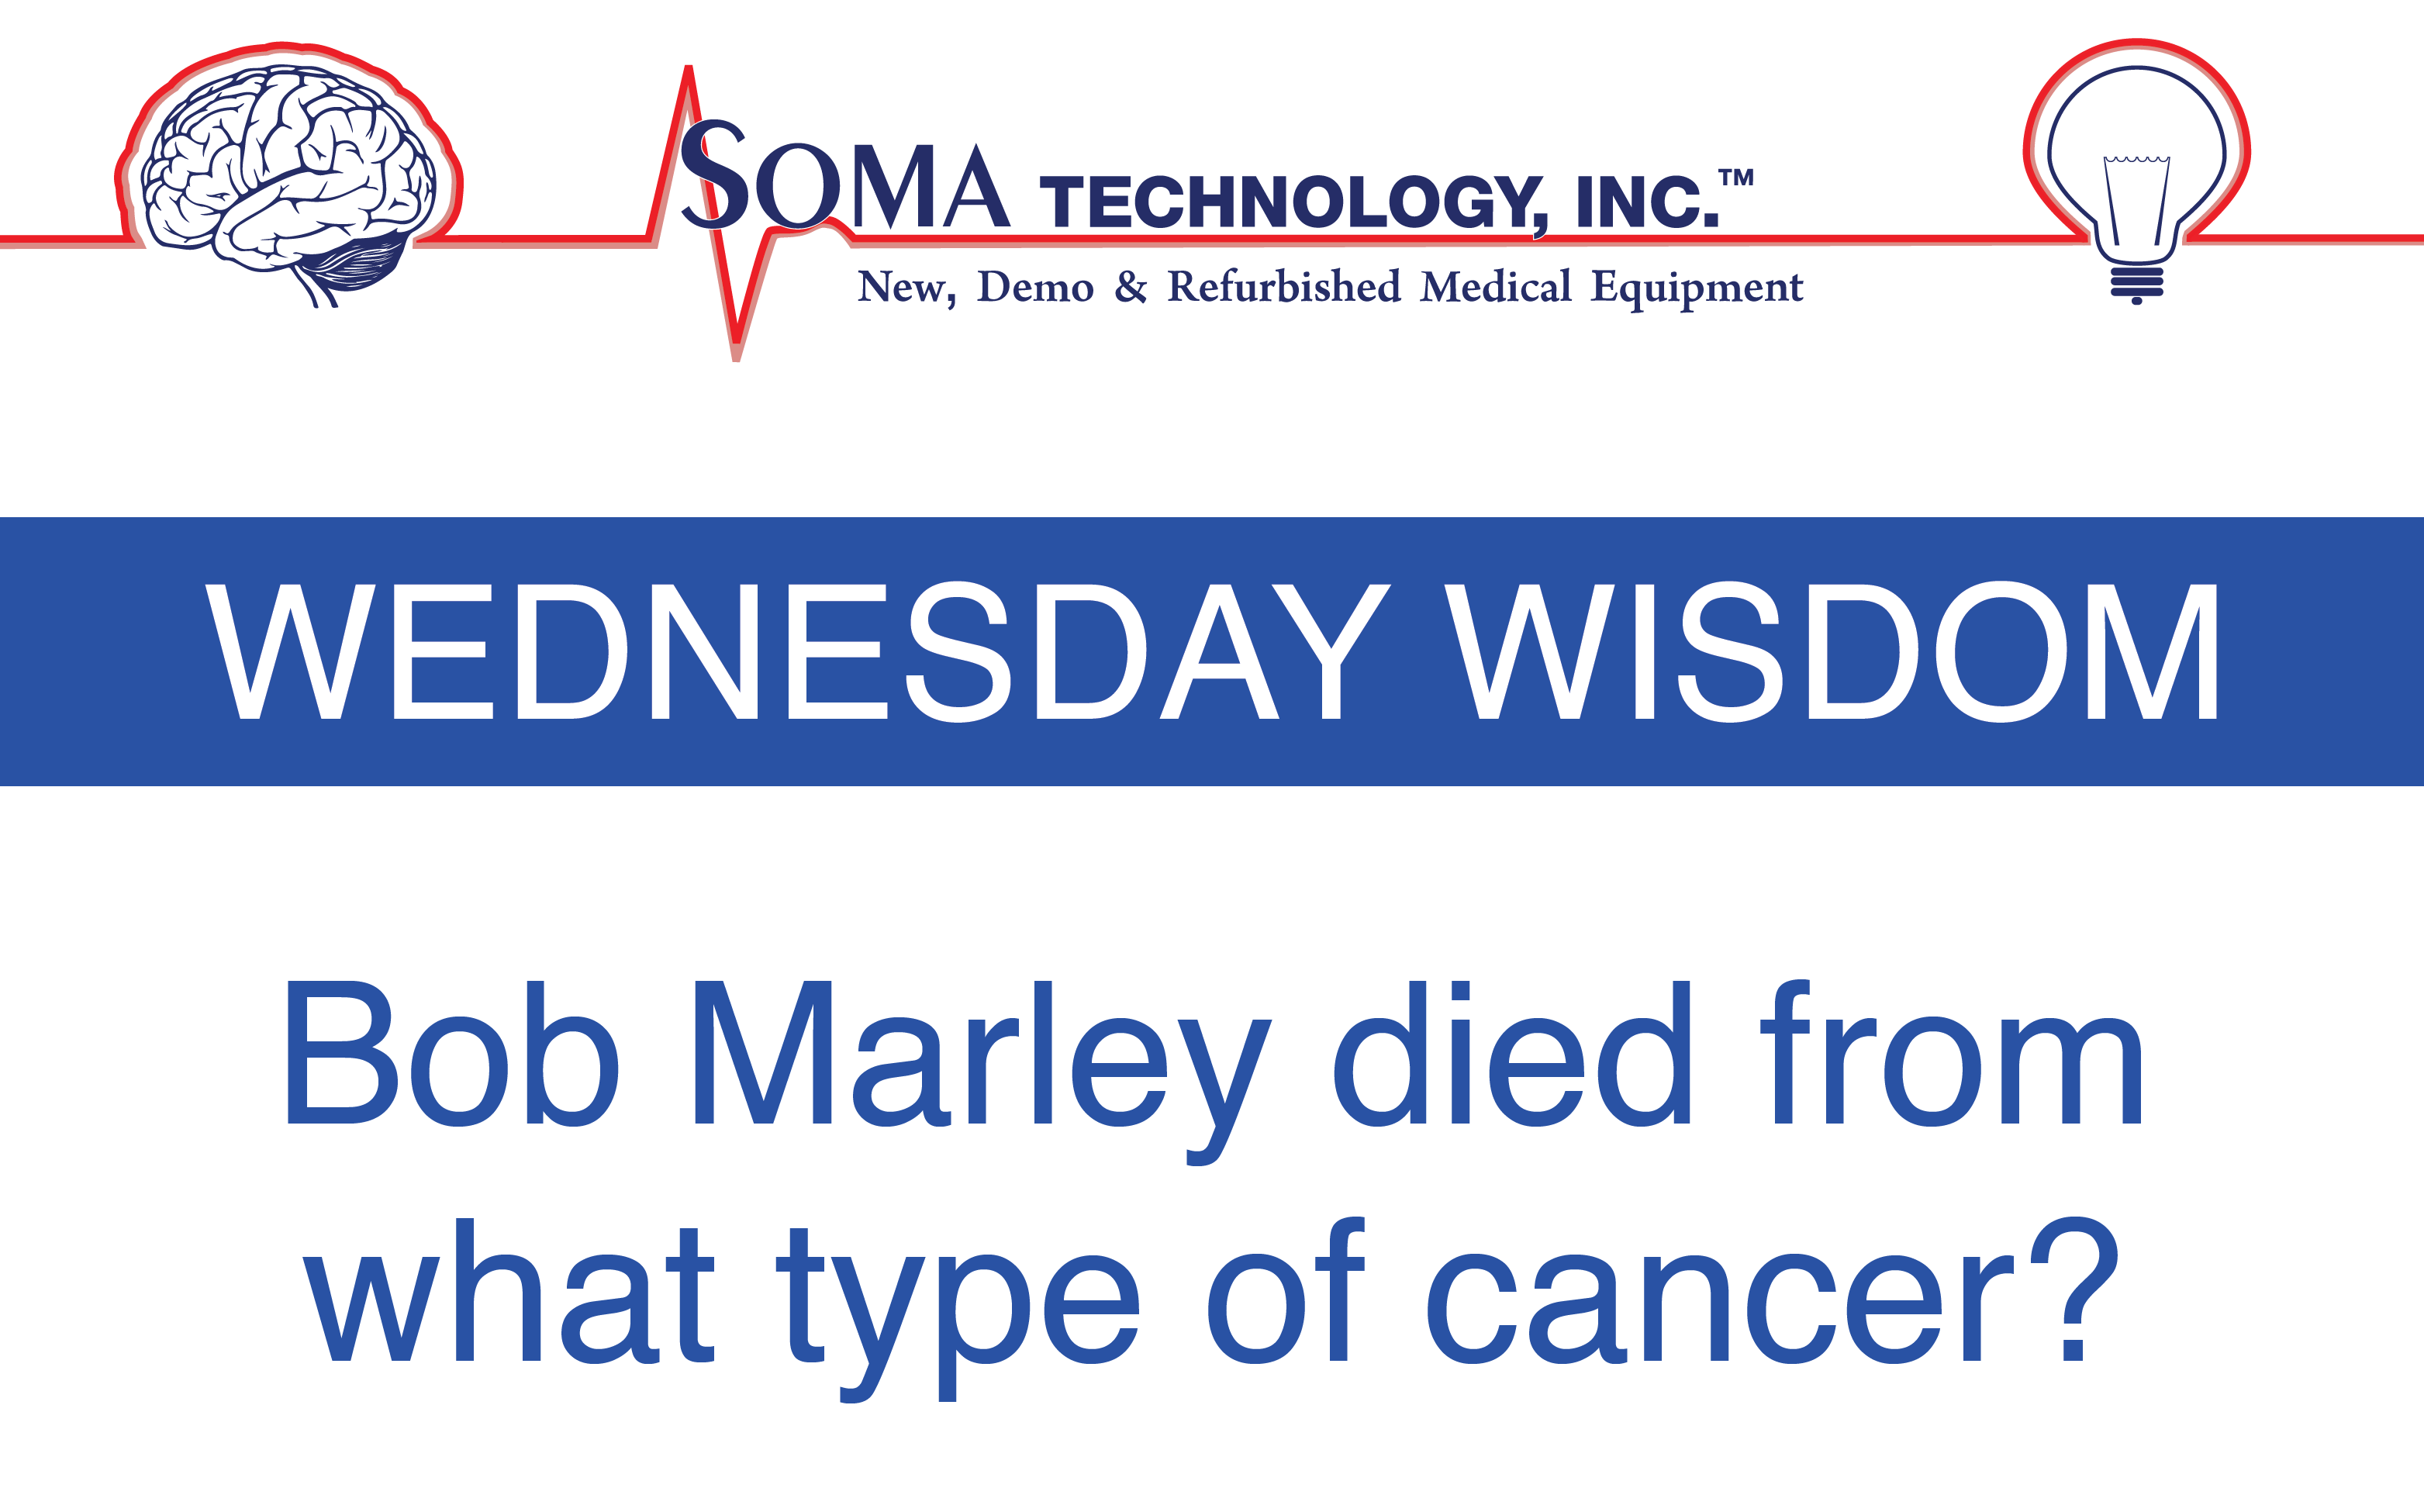 Bob Marley Died From What Type of Cancer? - Soma Technology, Inc.